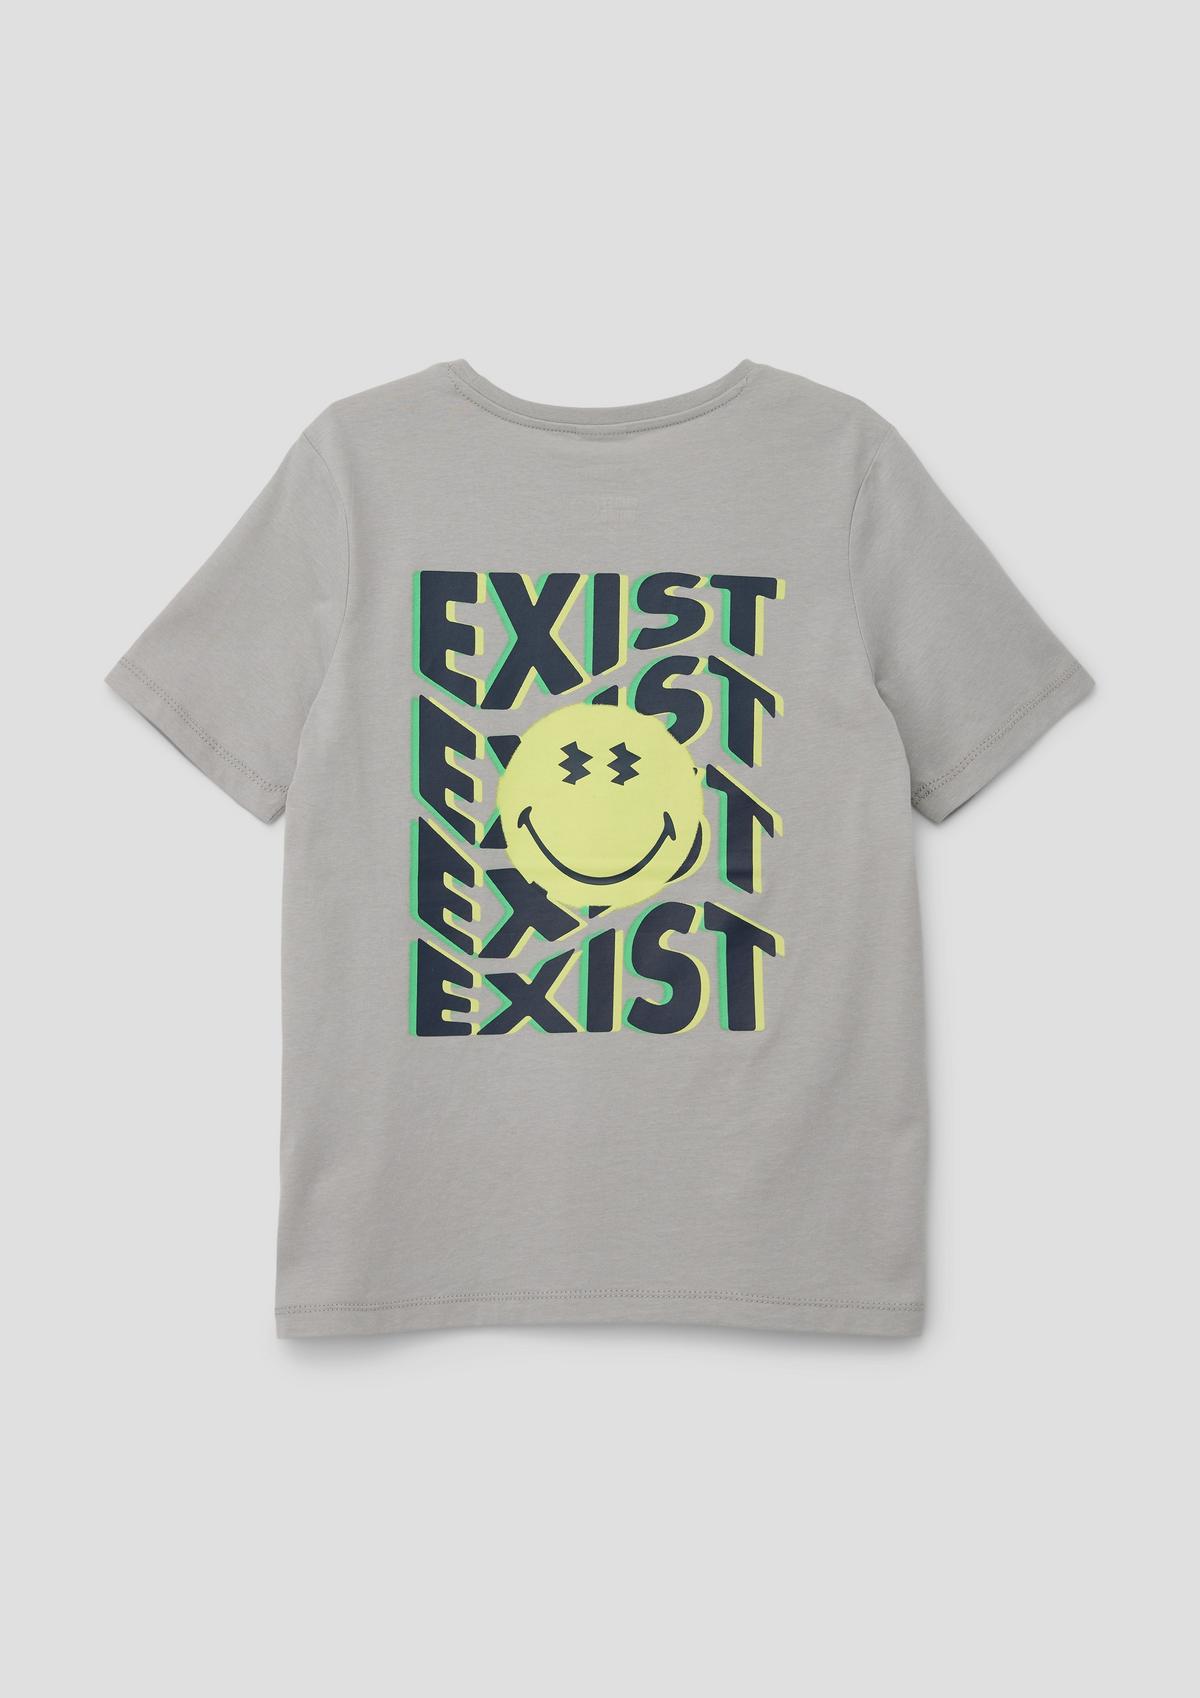 s.Oliver T-shirt with a Smiley® print on the front and back